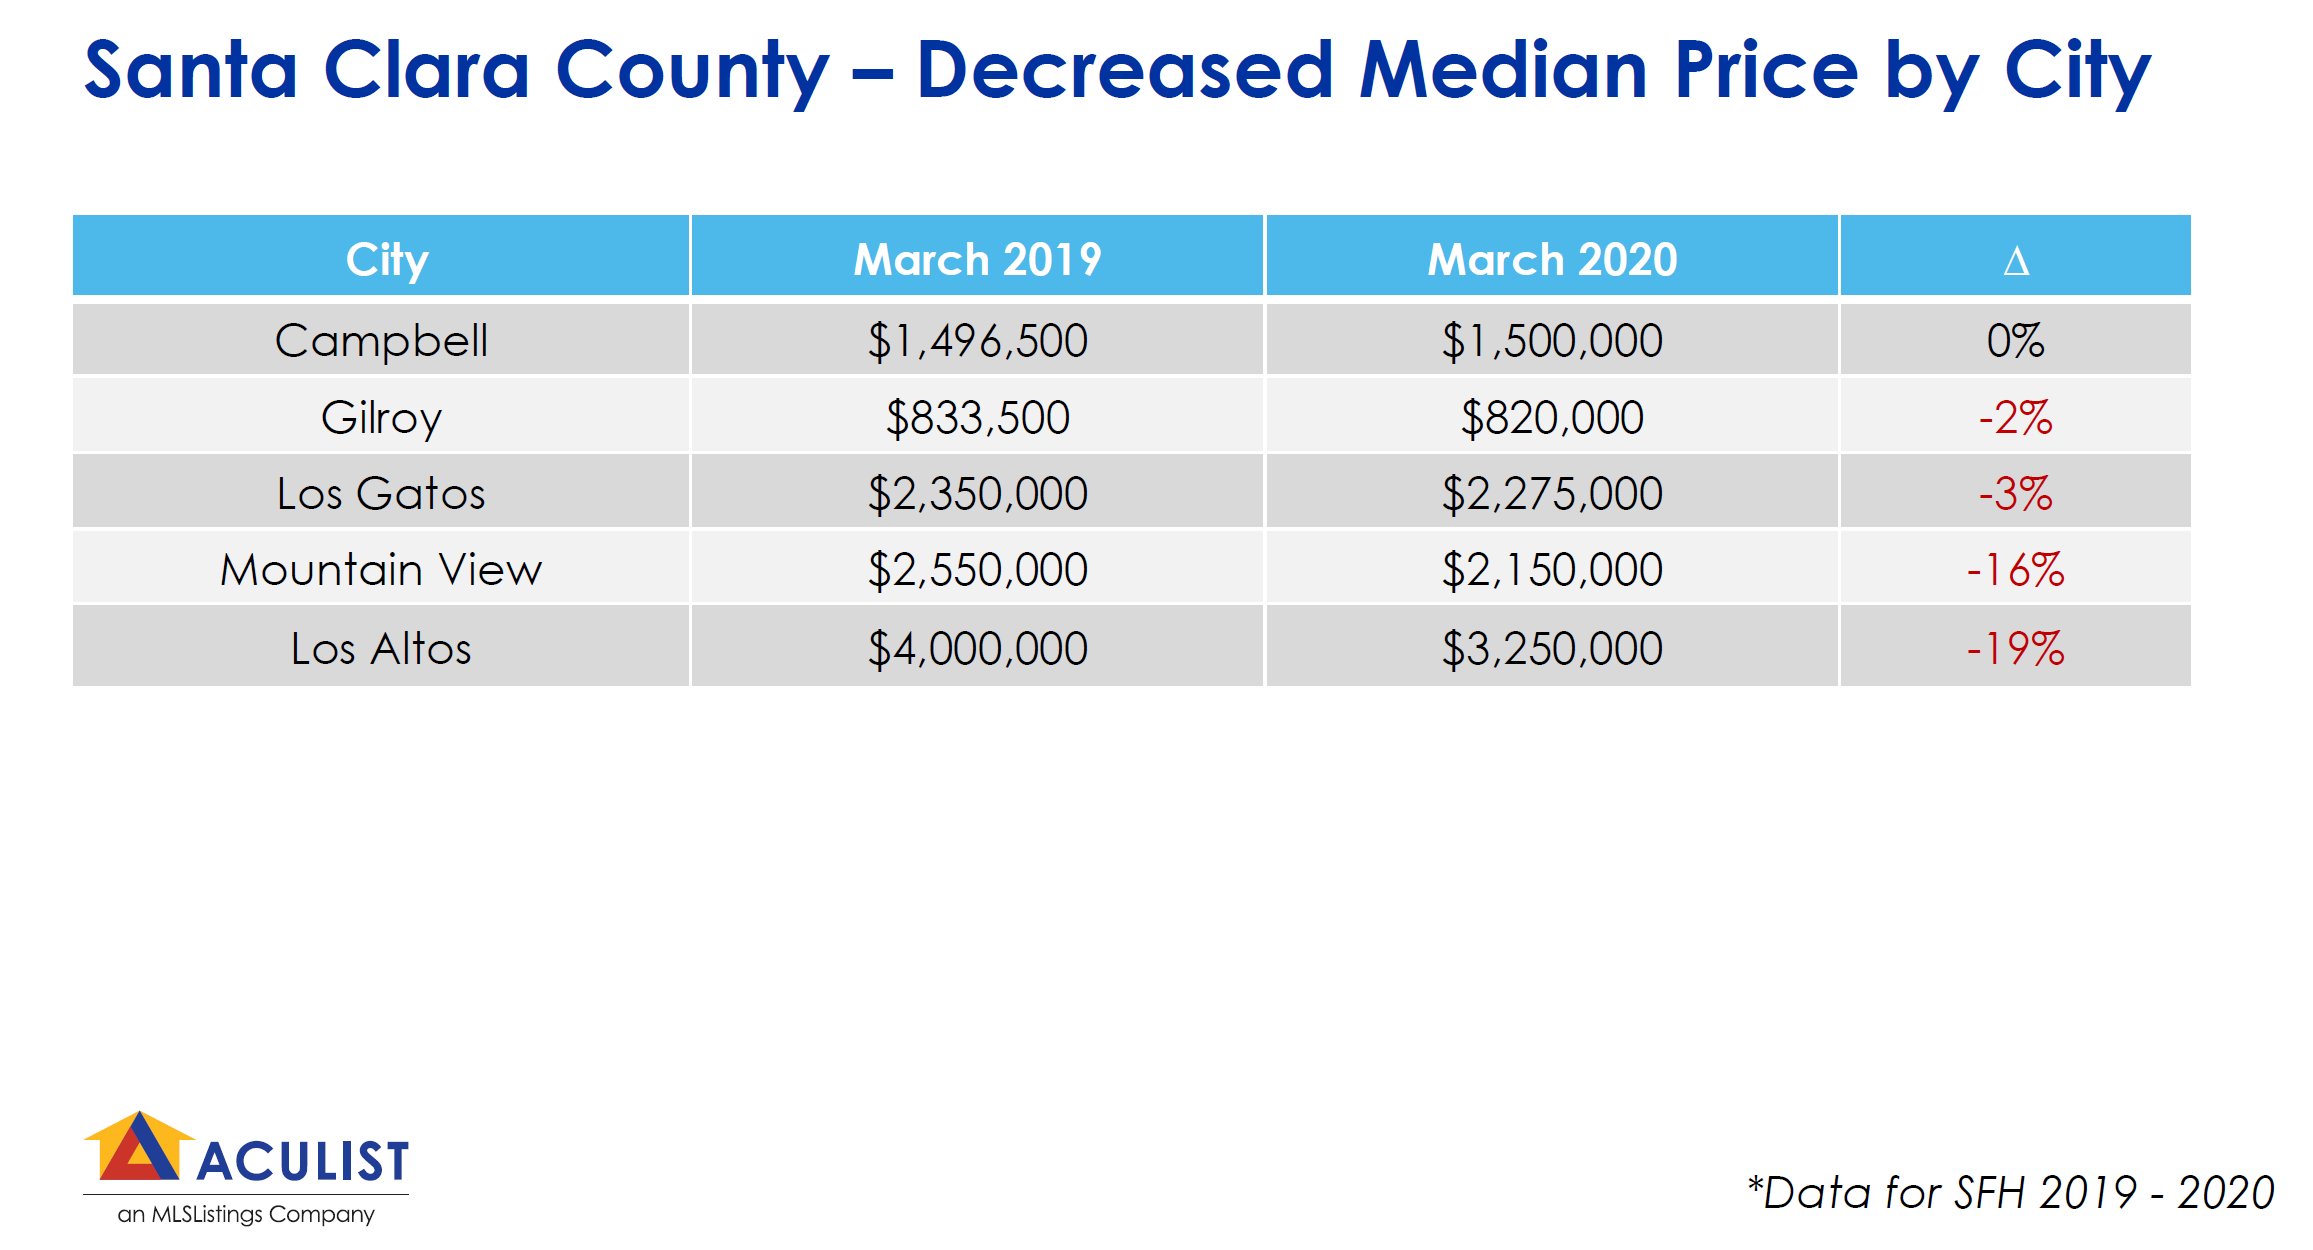 a minority of cities have had price decreases